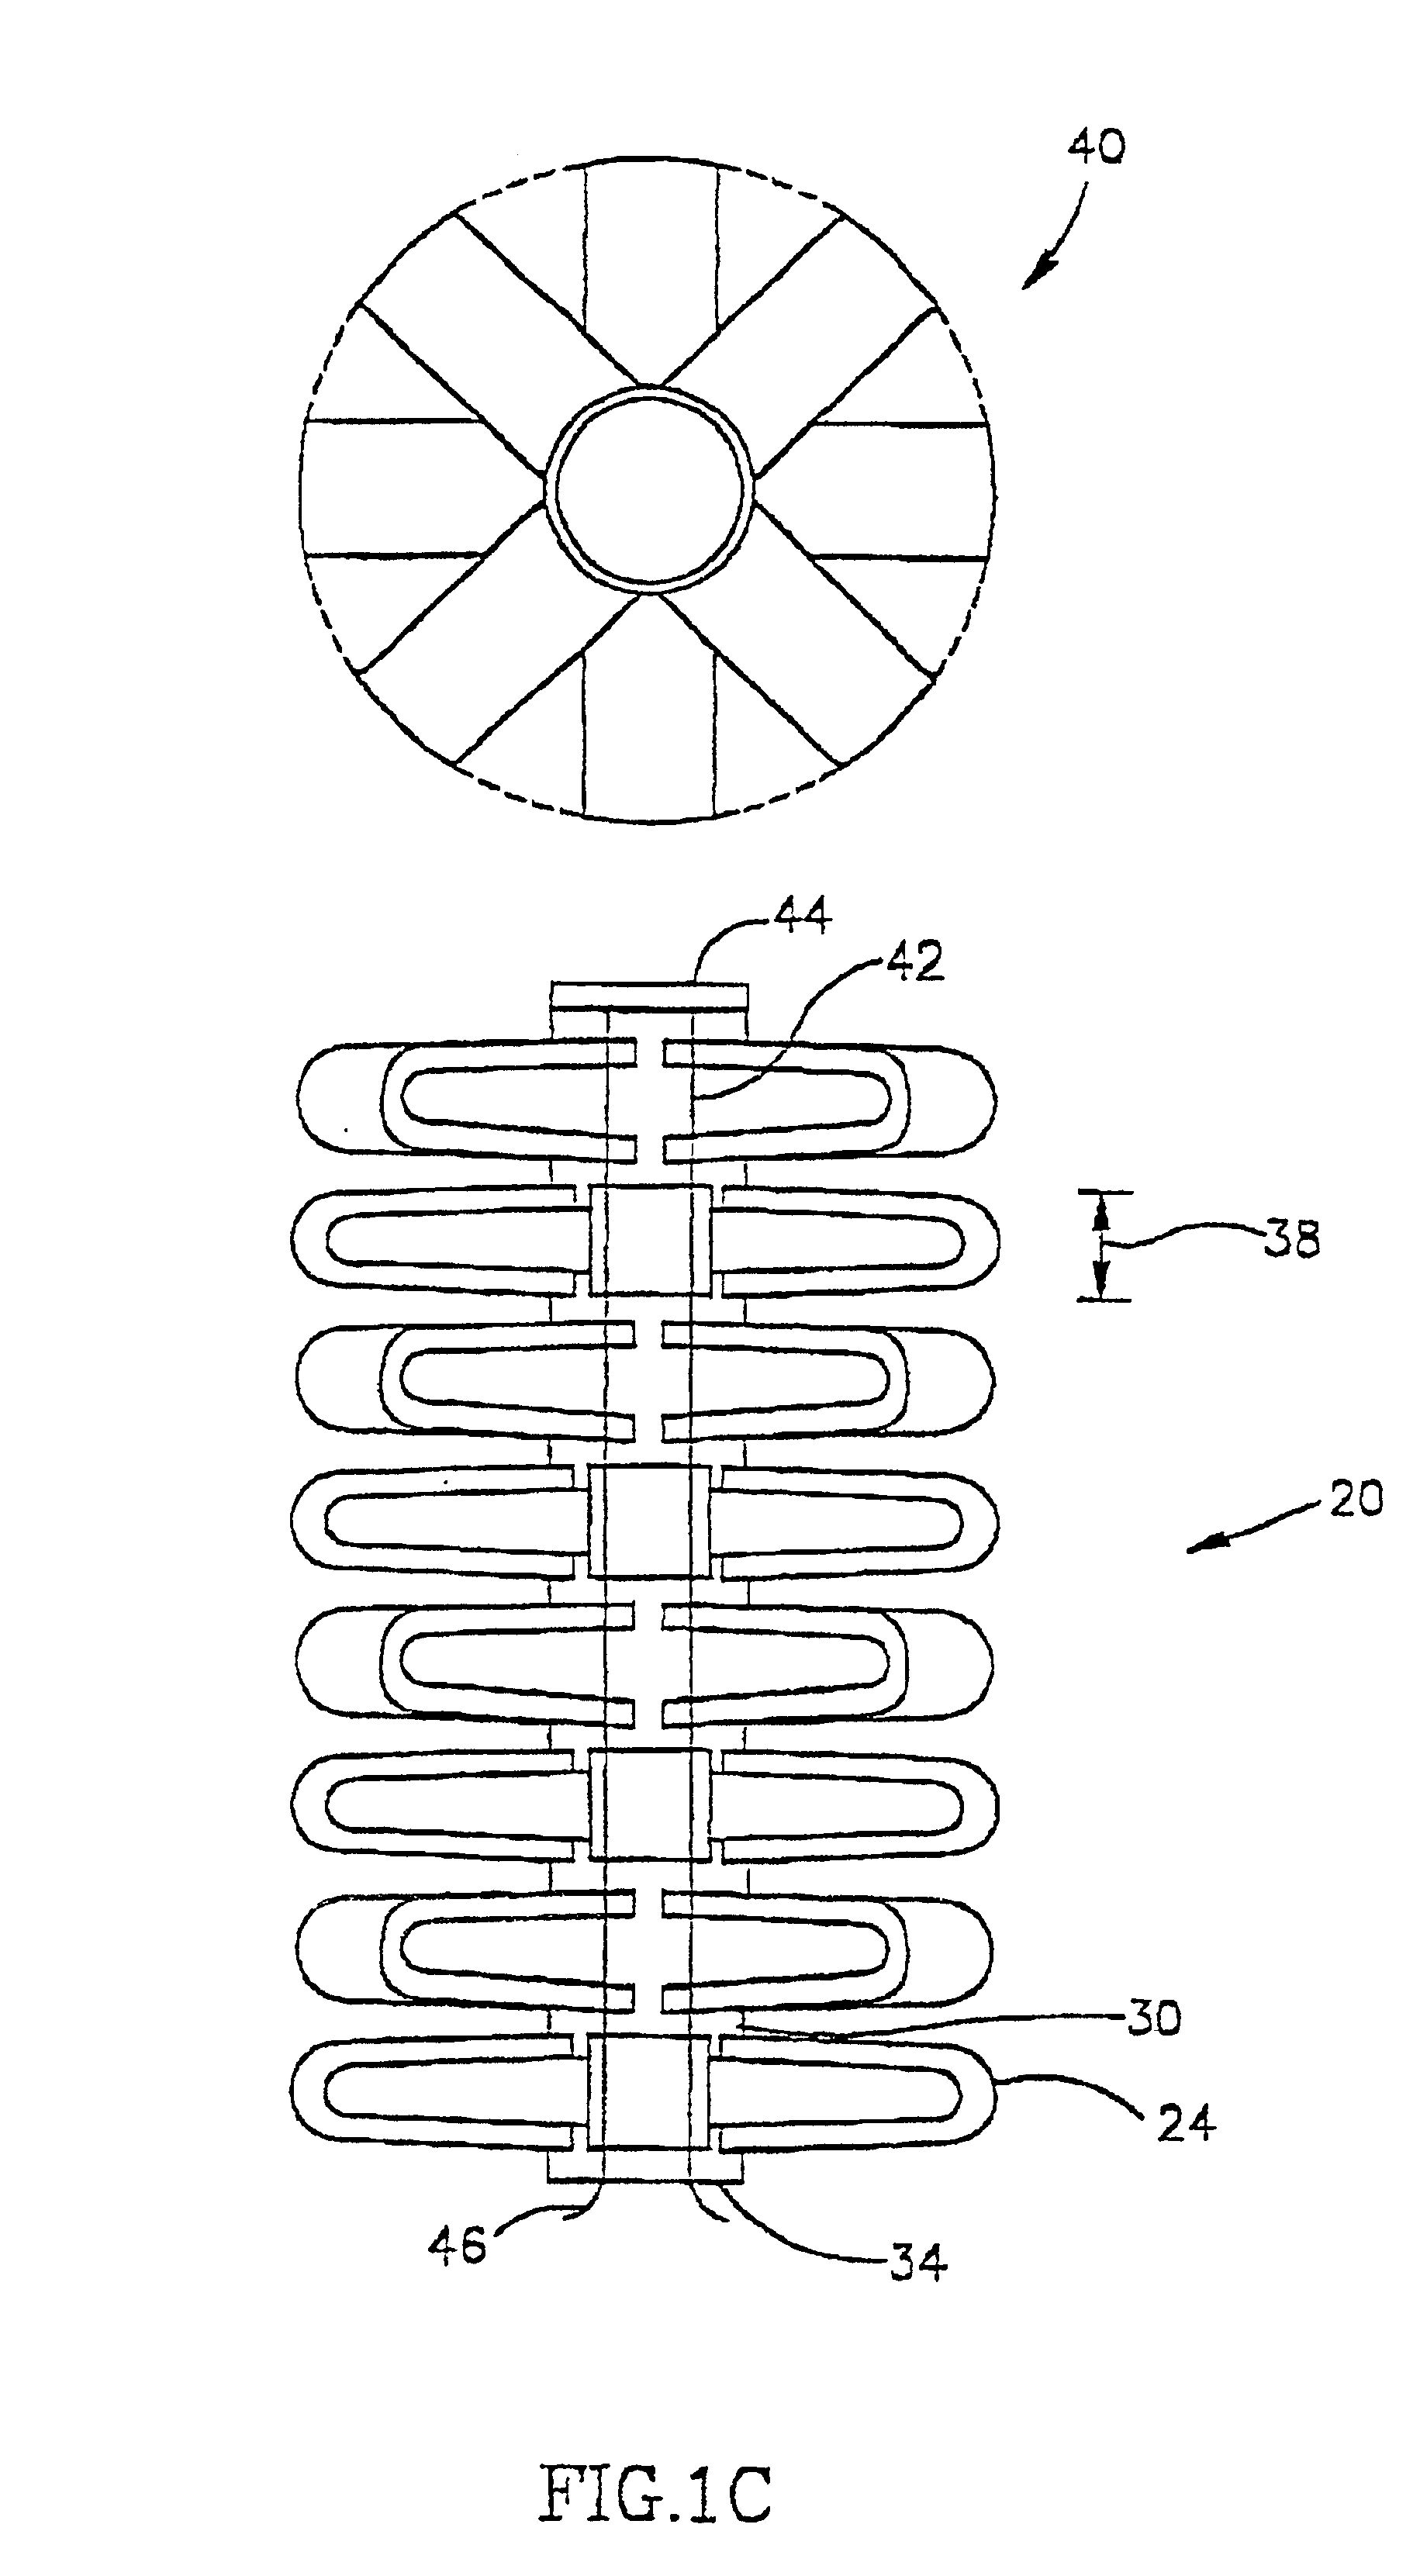 Expandable element delivery system